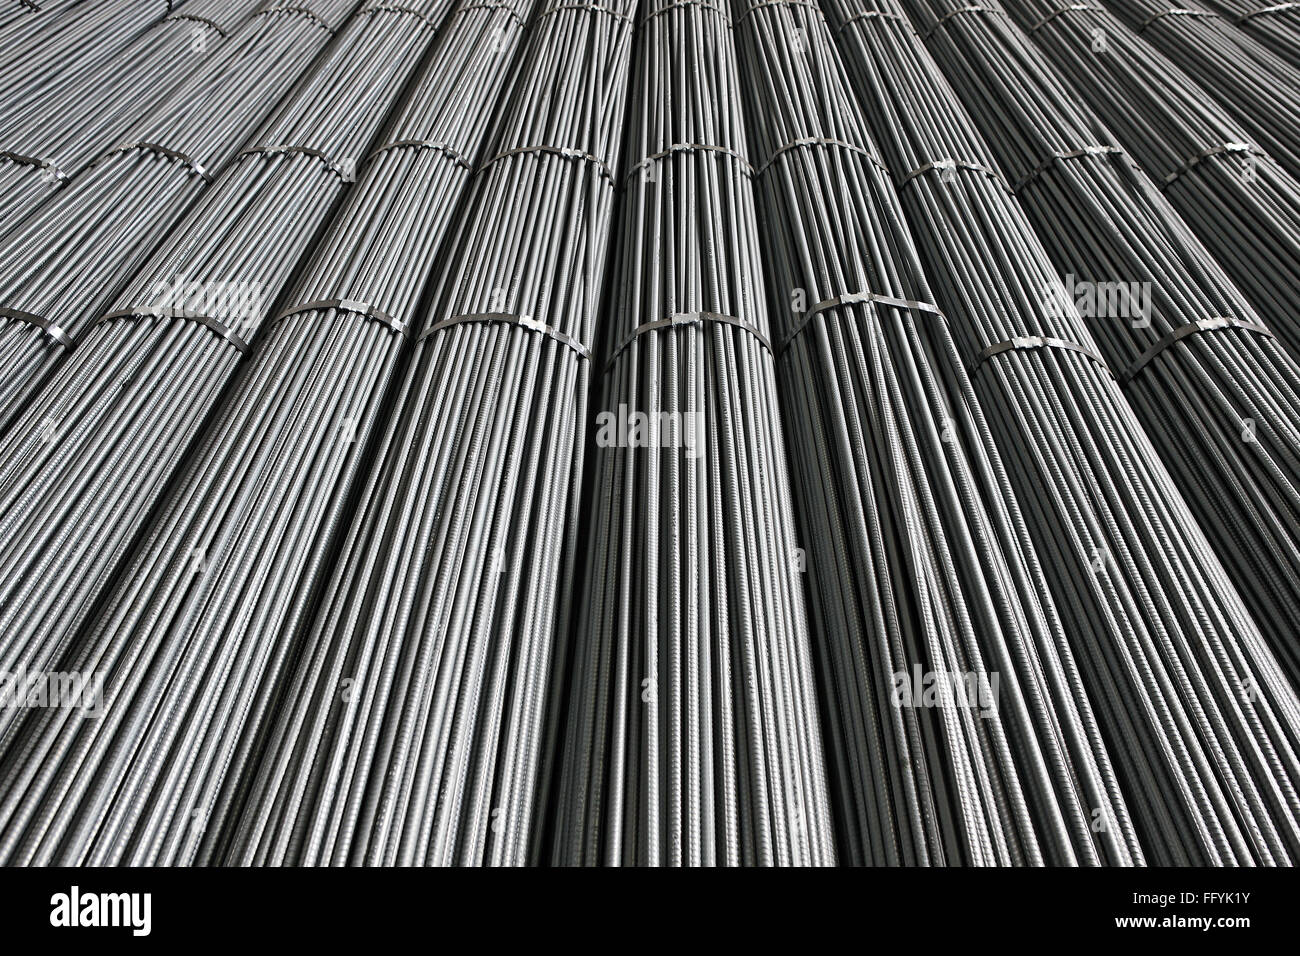 Bundles of Twisted Steel Rods used for construction Industry India Stock Photo